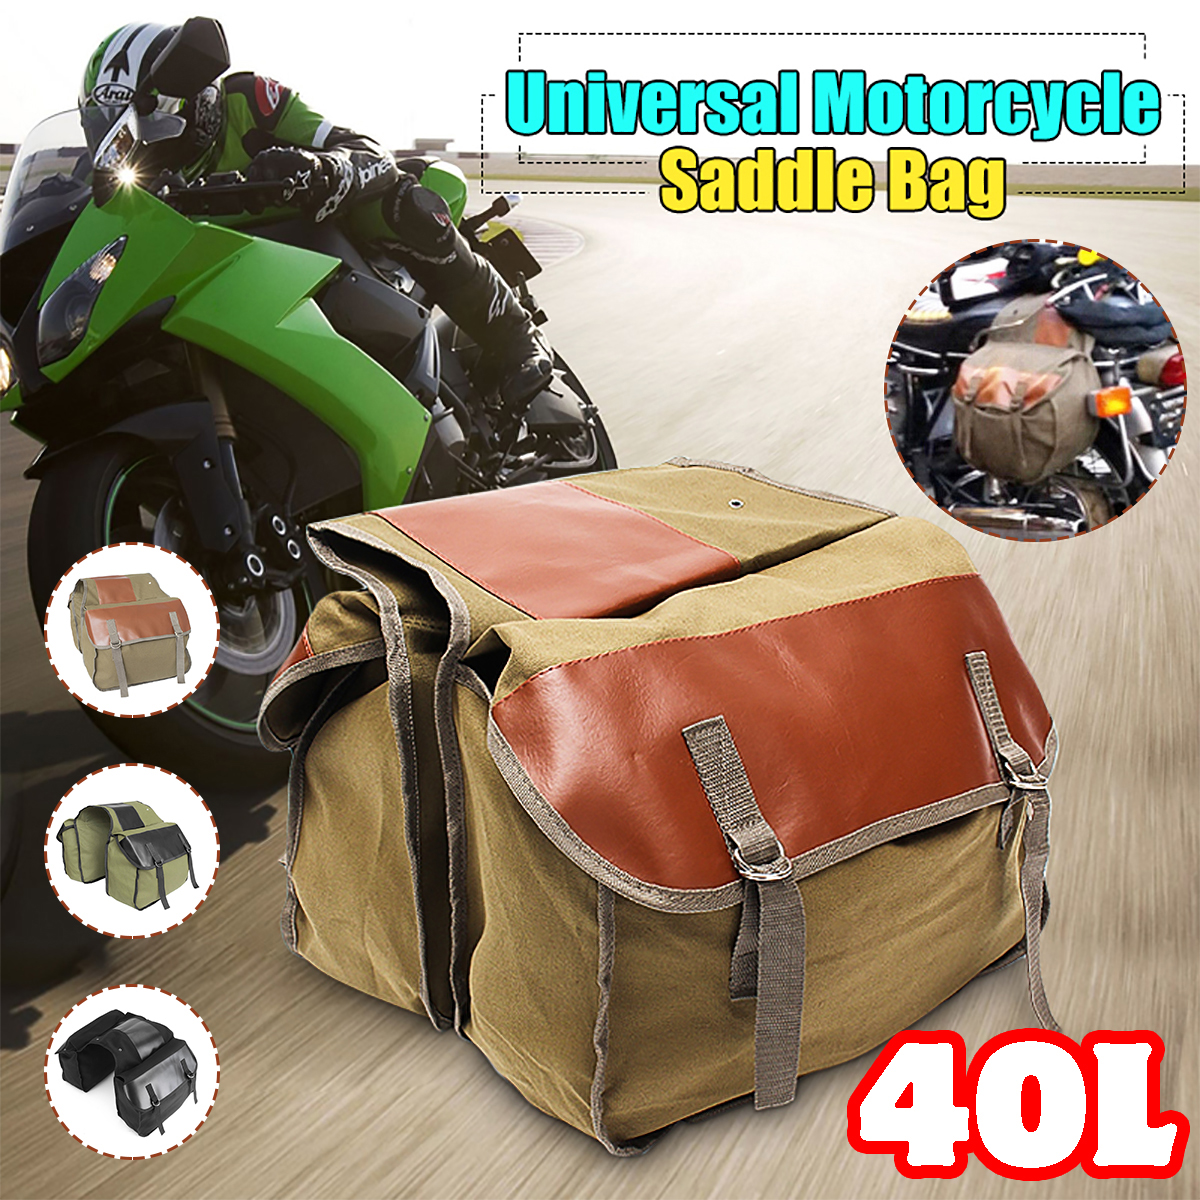 PU-Leather-Motorcycle-Side-Saddle-Bag-with-2-Large-Pockets-Mobile-Phone-Tablet-Bottoles-Repairing-St-1863632-1